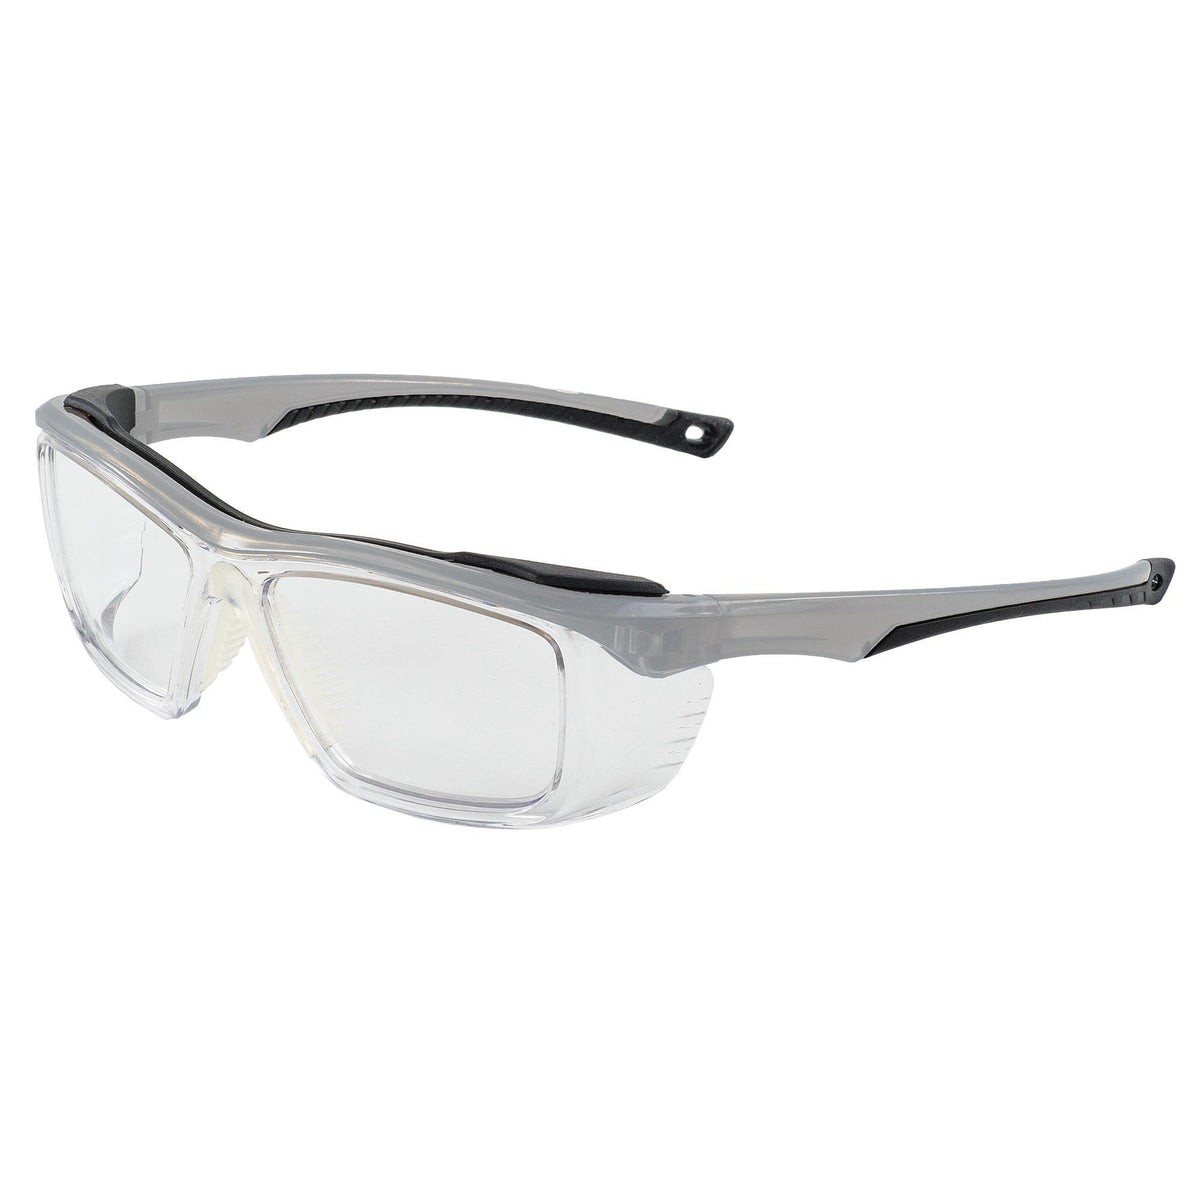 All-Day Safety Glasses 1PC